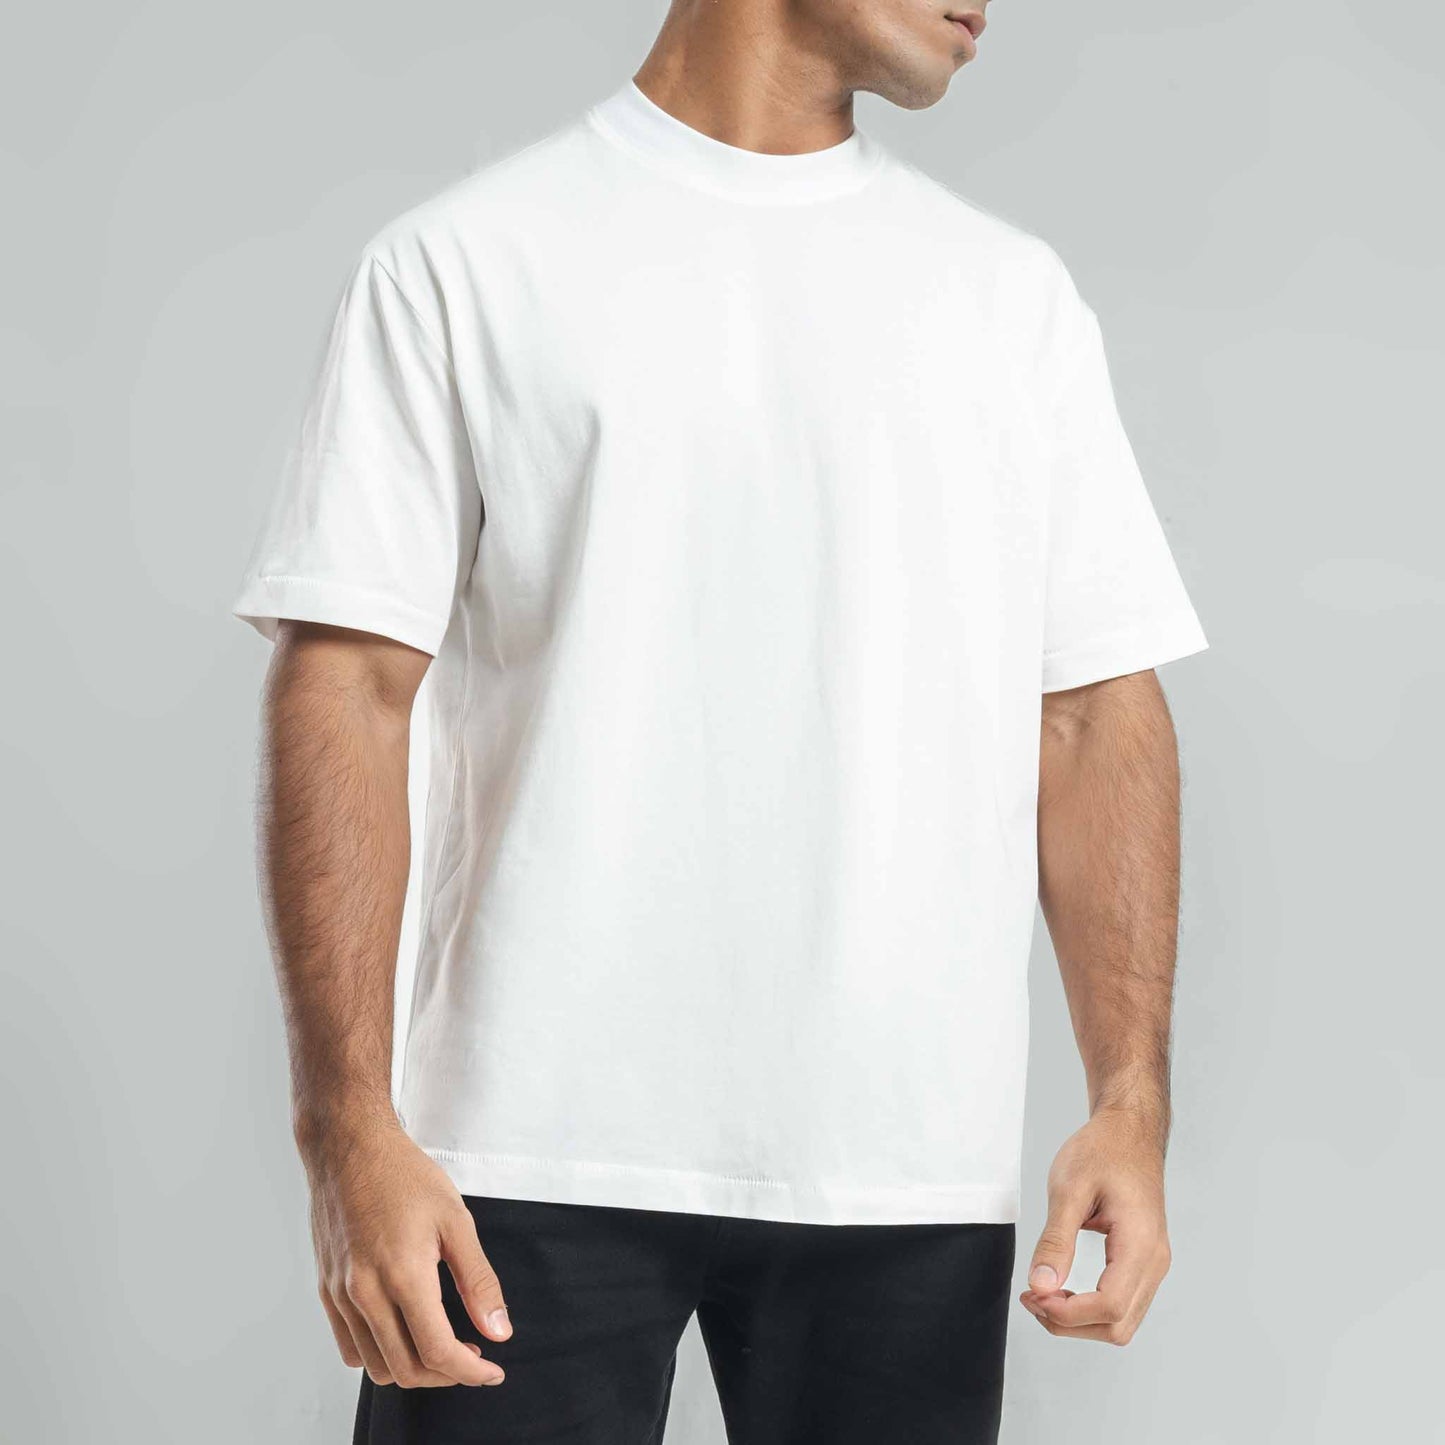 Relax fit Plain oversize - White